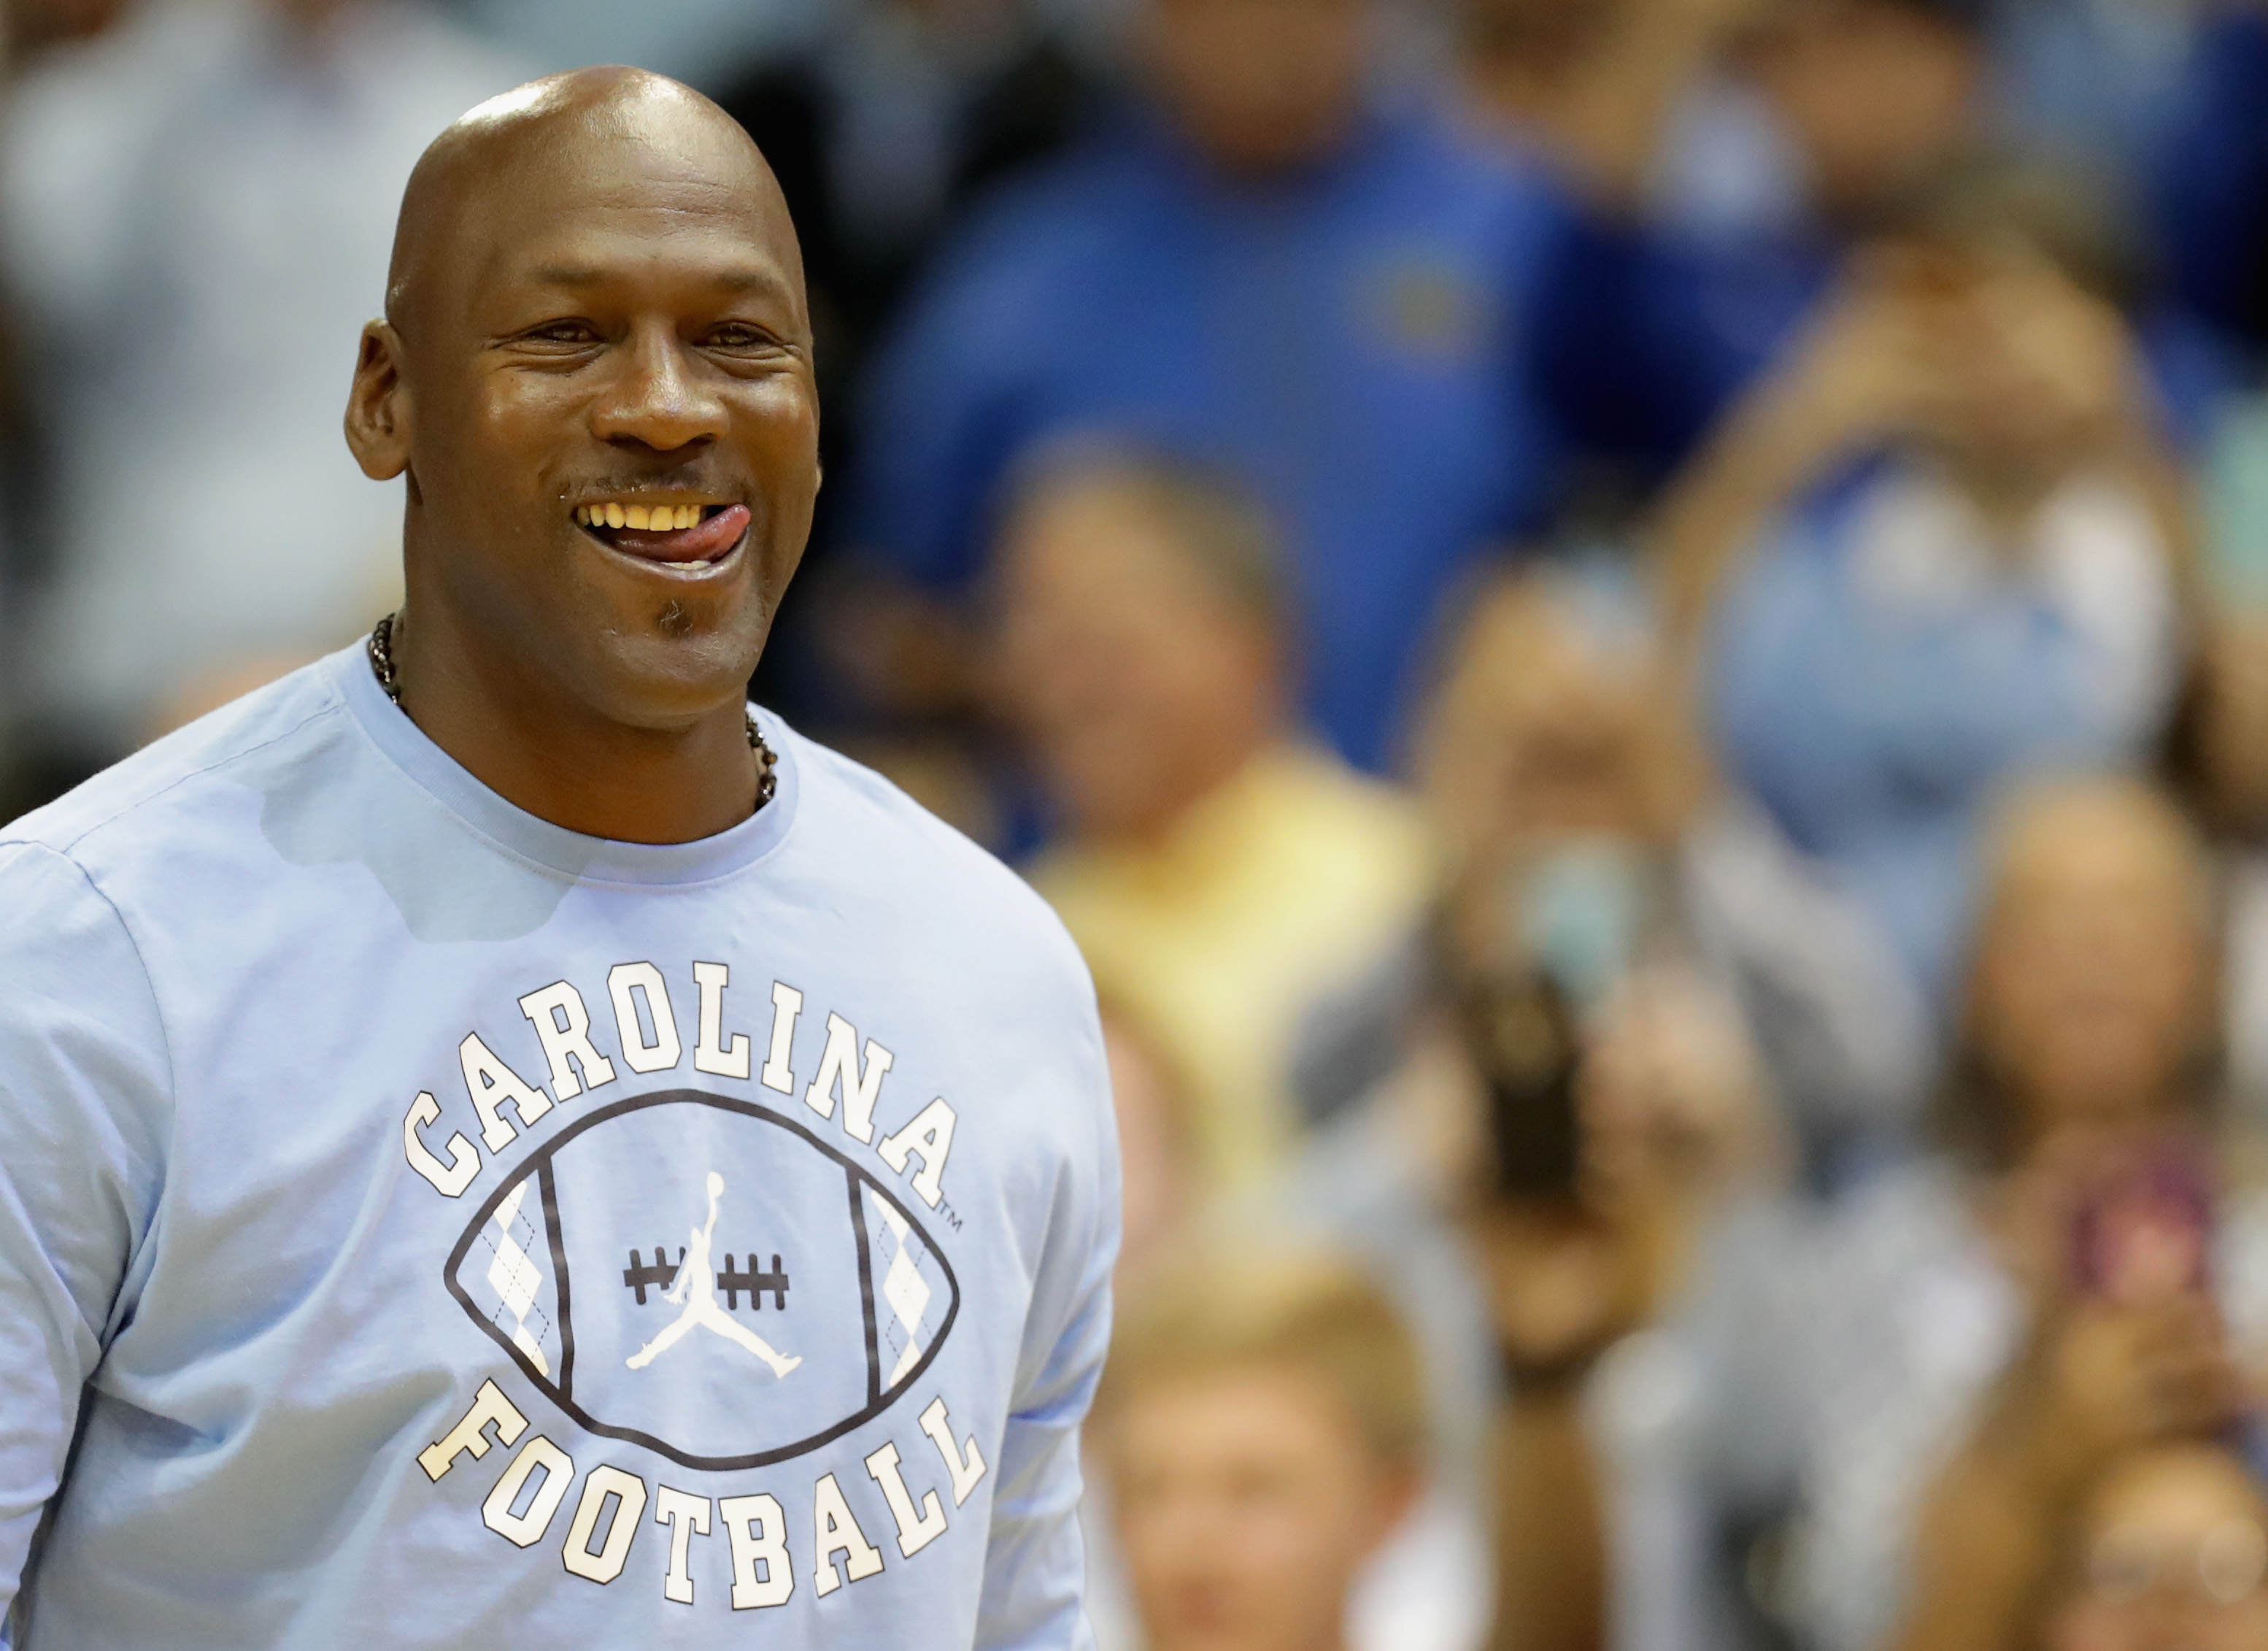 A 'Dream Team' jersey worn and signed by Michael Jordan sold for $216,000